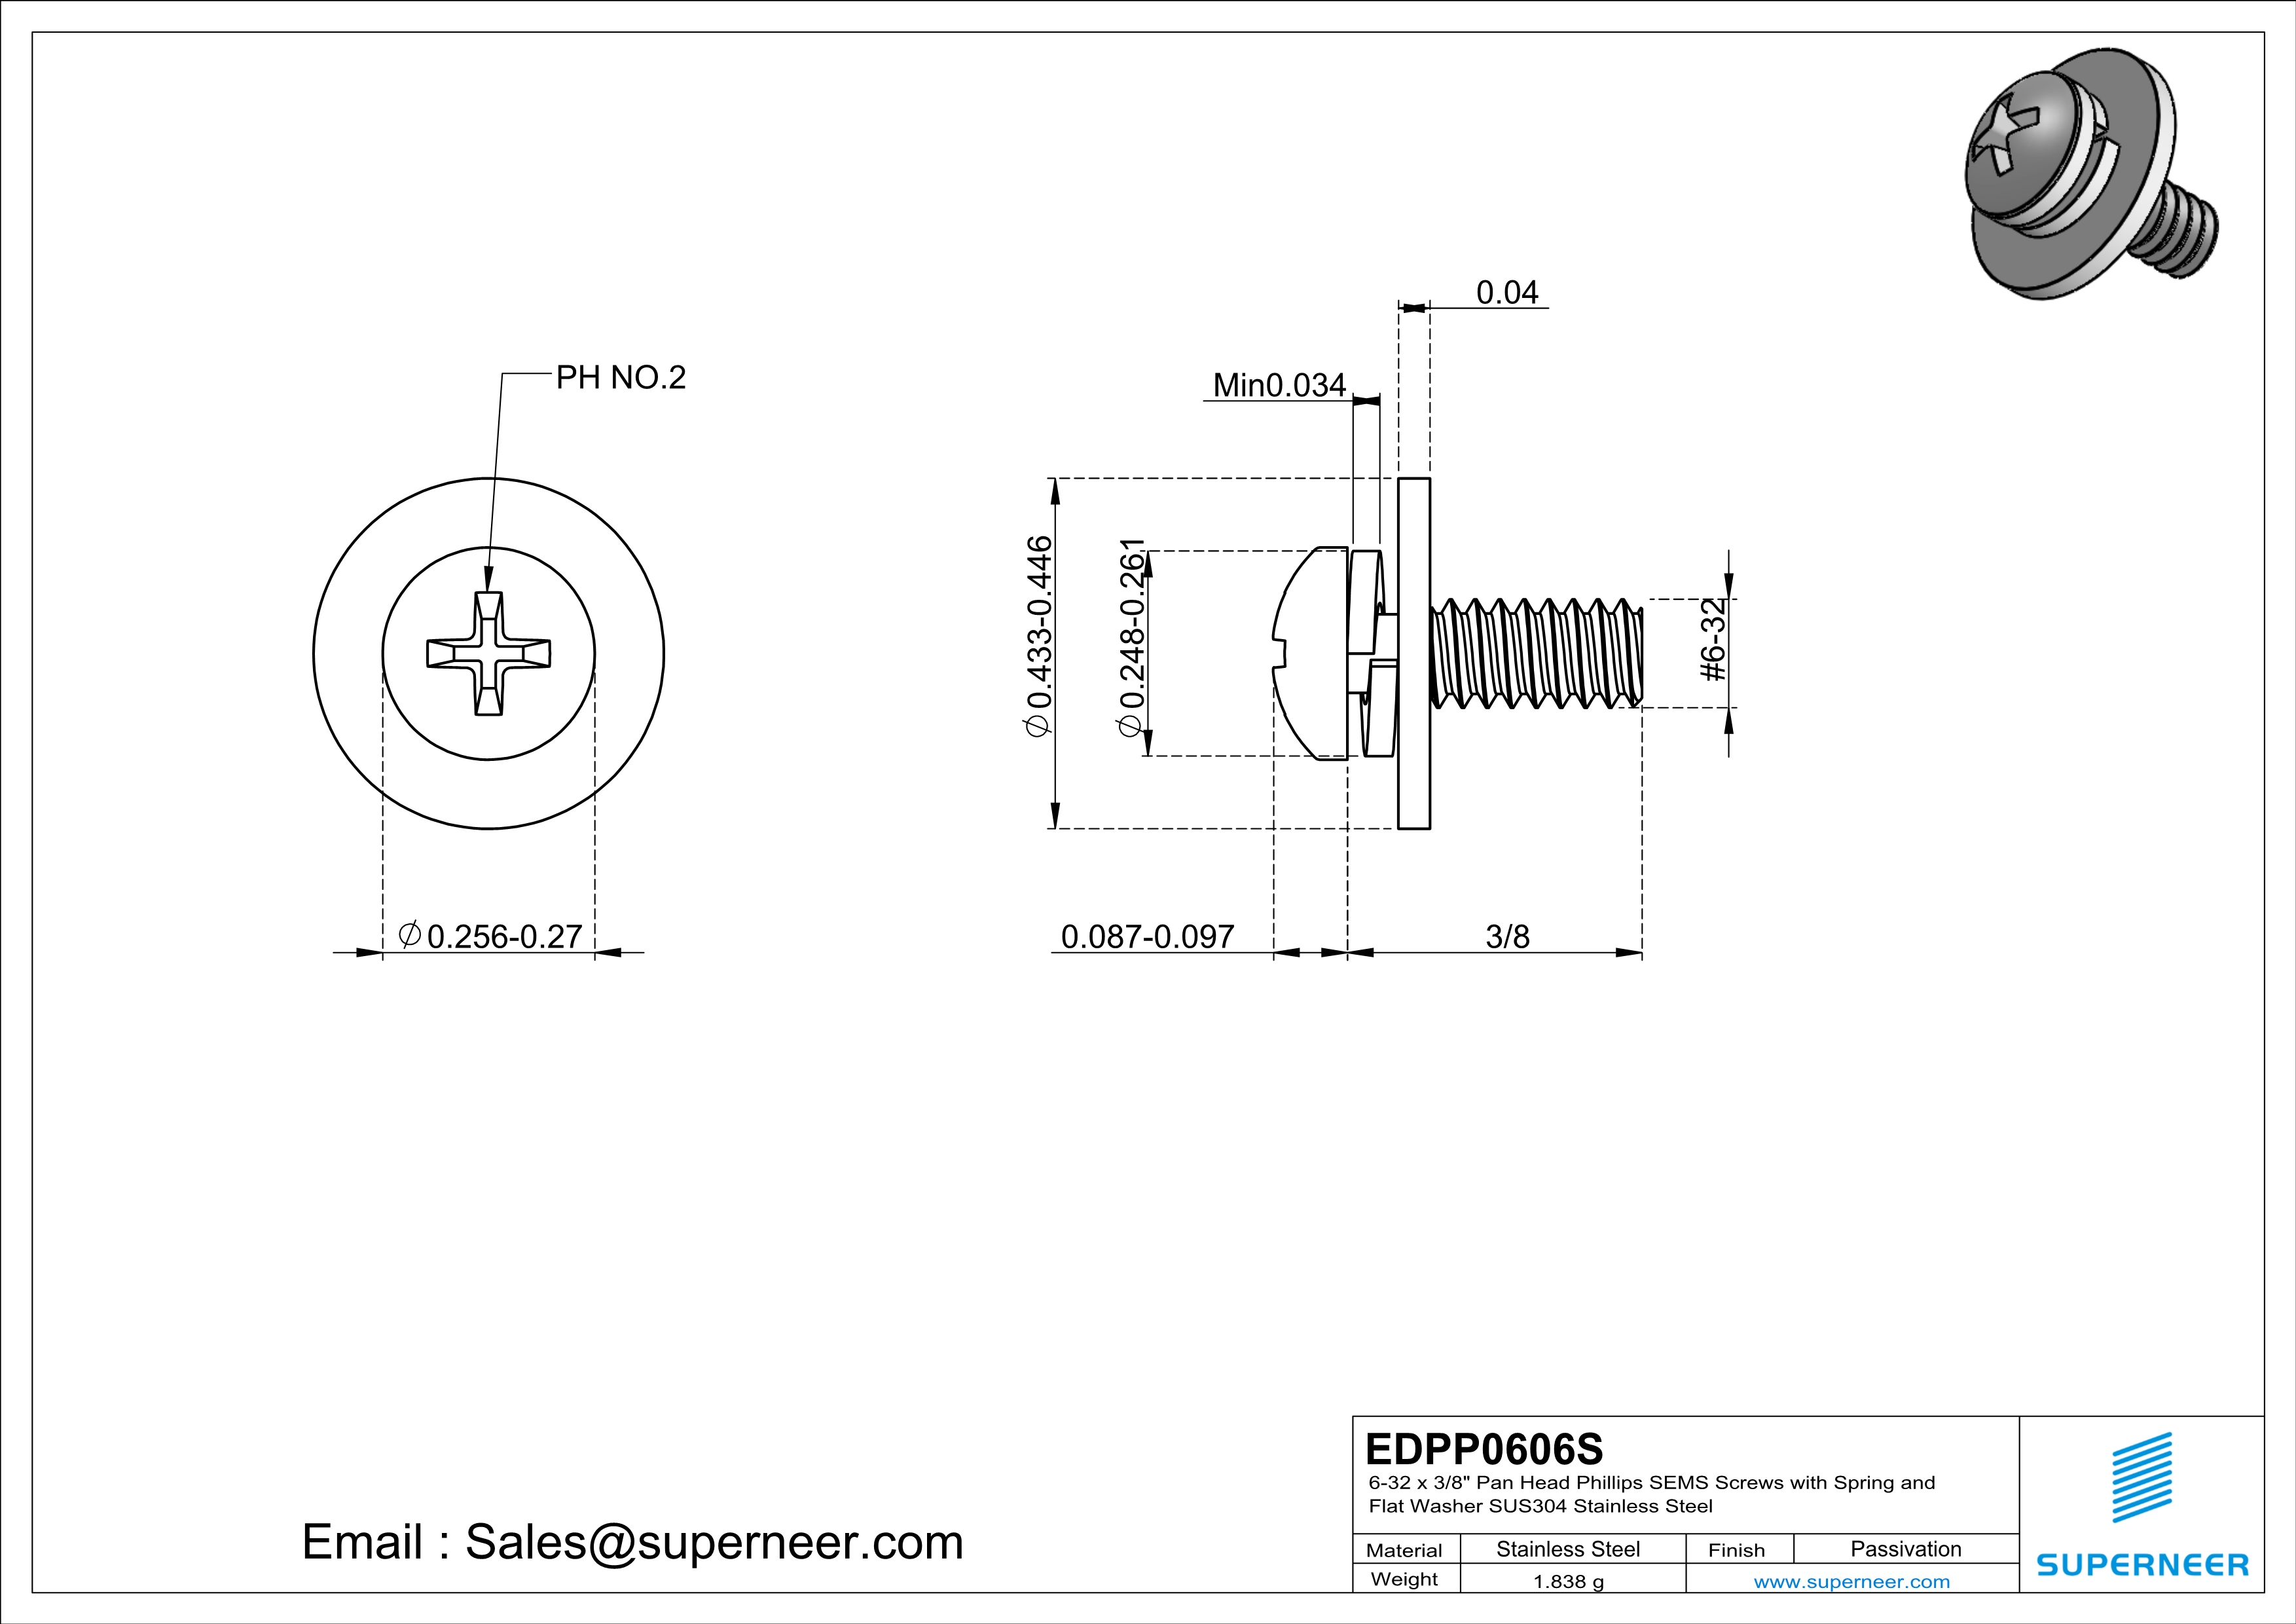 6-32 x 3/8" Pan Head Phillips SEMS Screws with Spring and Flat Washer SUS304 Stainless Steel Inox